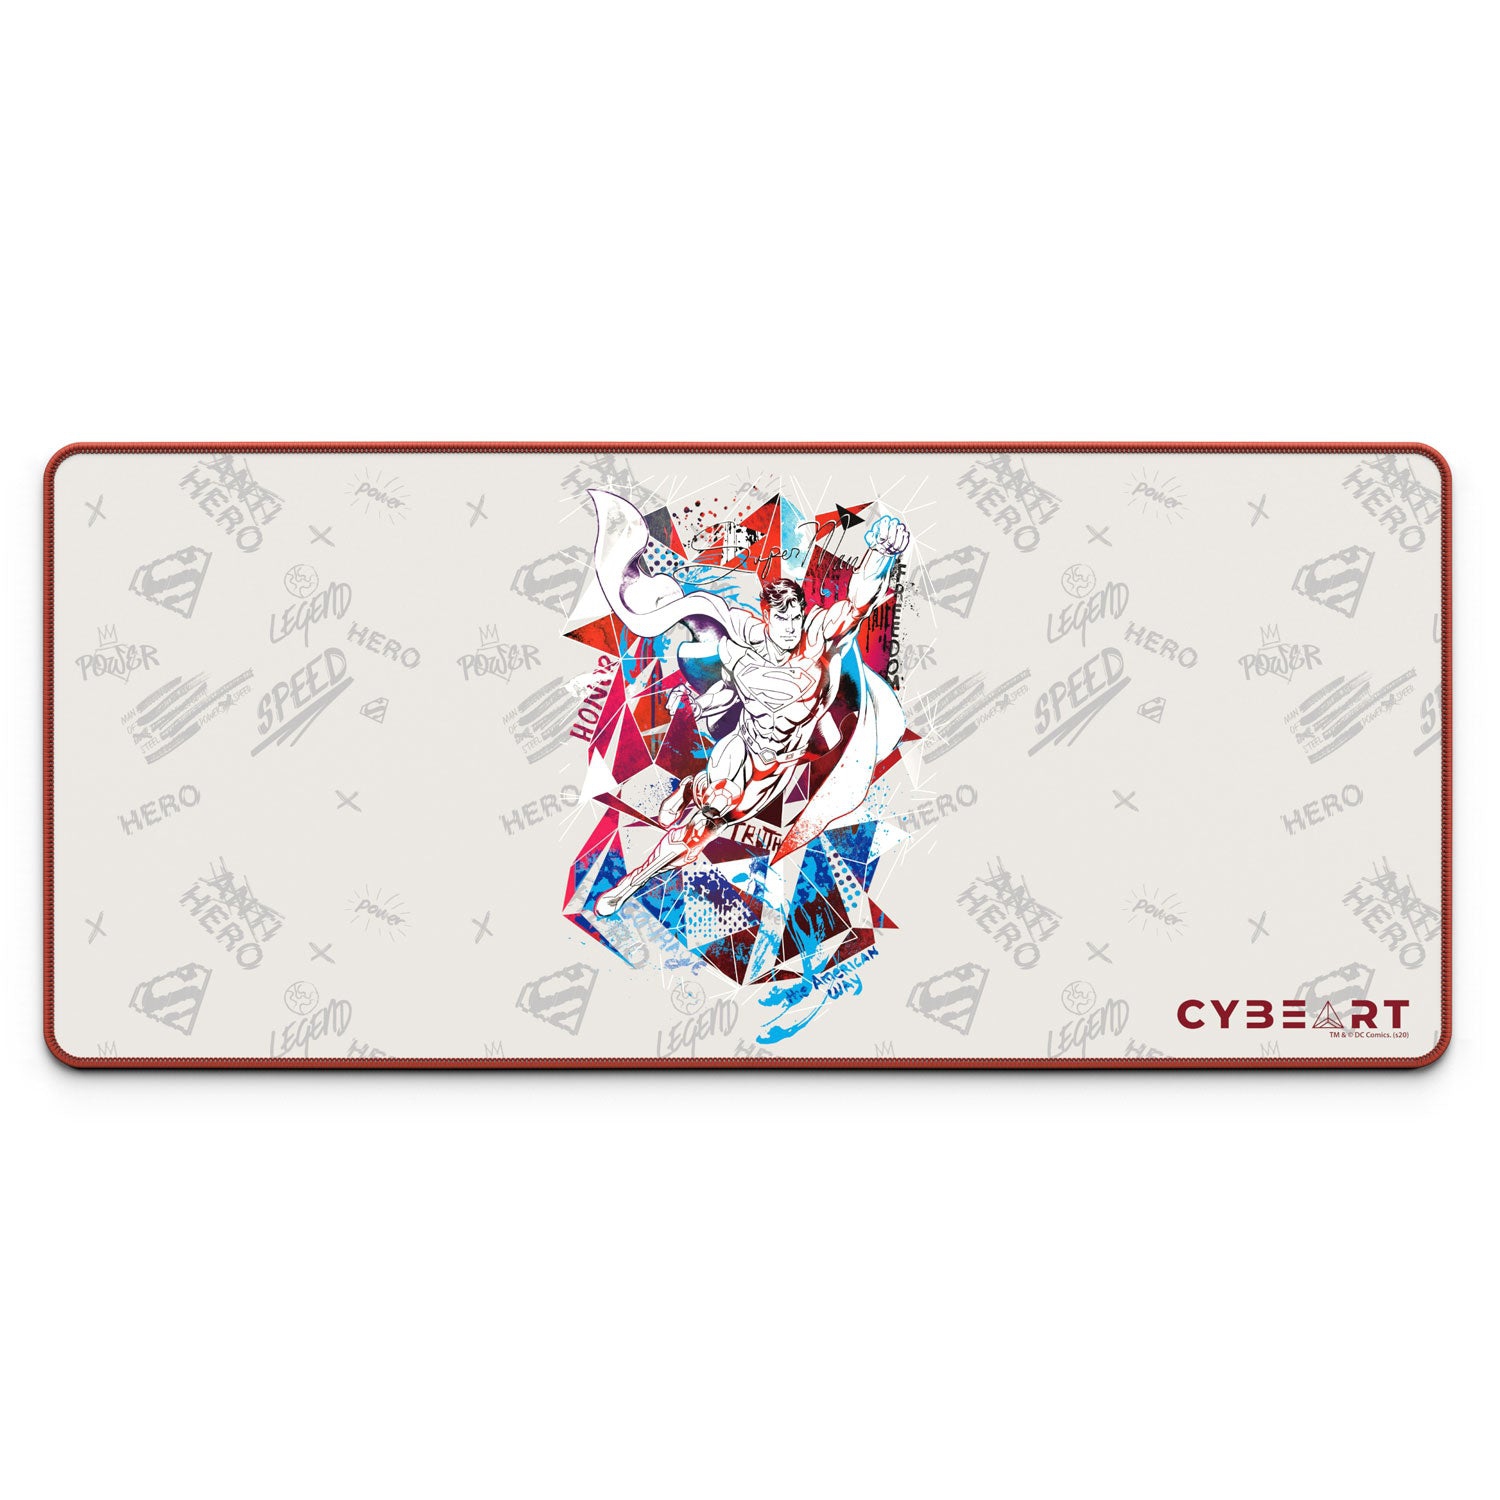 CYBEART | Superman - Truth Honor Courage Gaming Mouse Pad | XXL Premium Licensed Gaming Mouse Pad (900 x 400 x 4mm / Rapid Series)